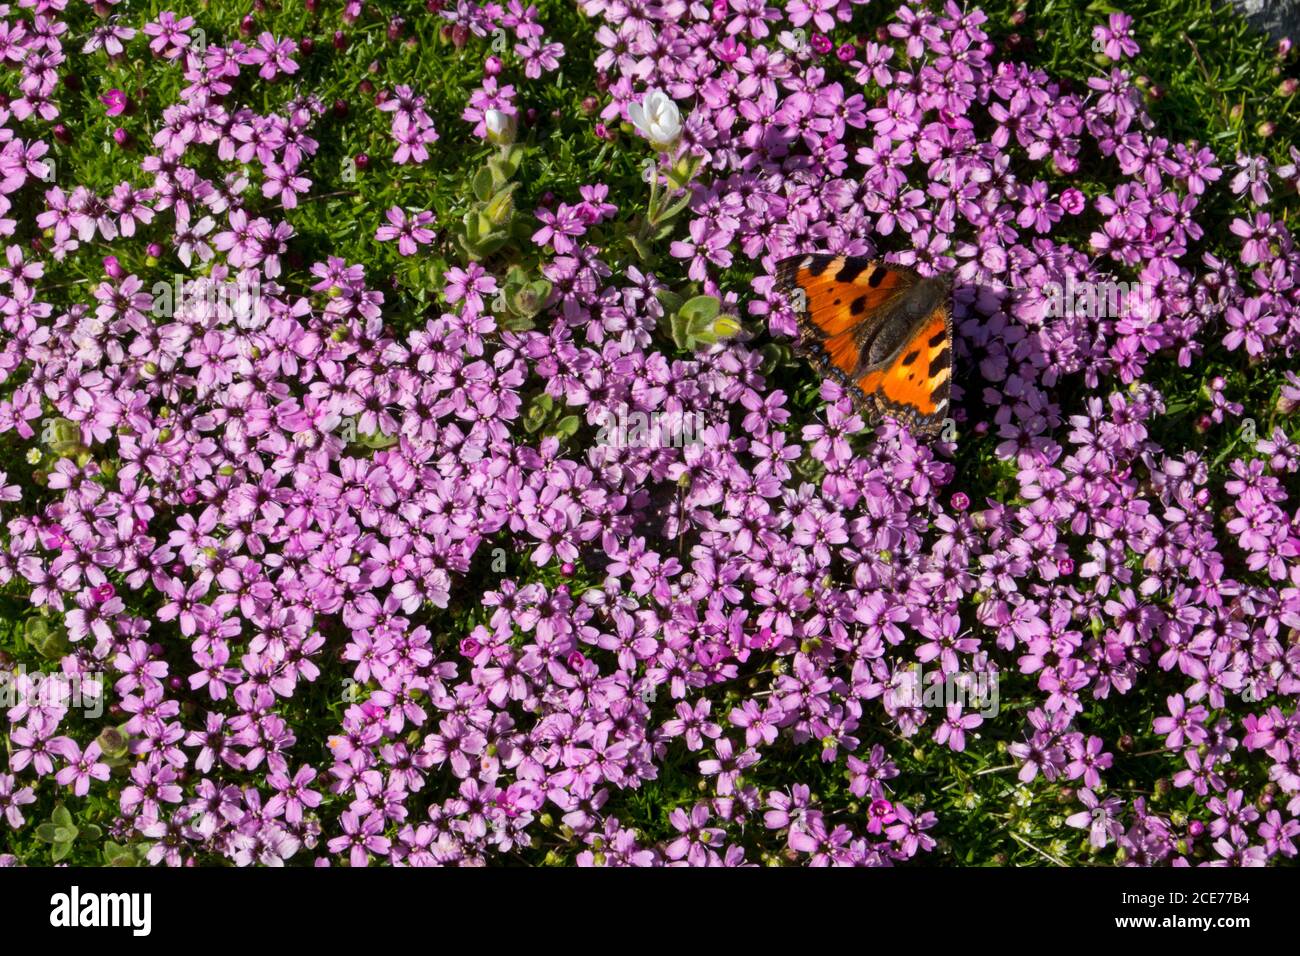 Reddish orange butterfly, a Small tortoiseshell on pink flowers of Rock jasmine, growing in a dense cushion Stock Photo